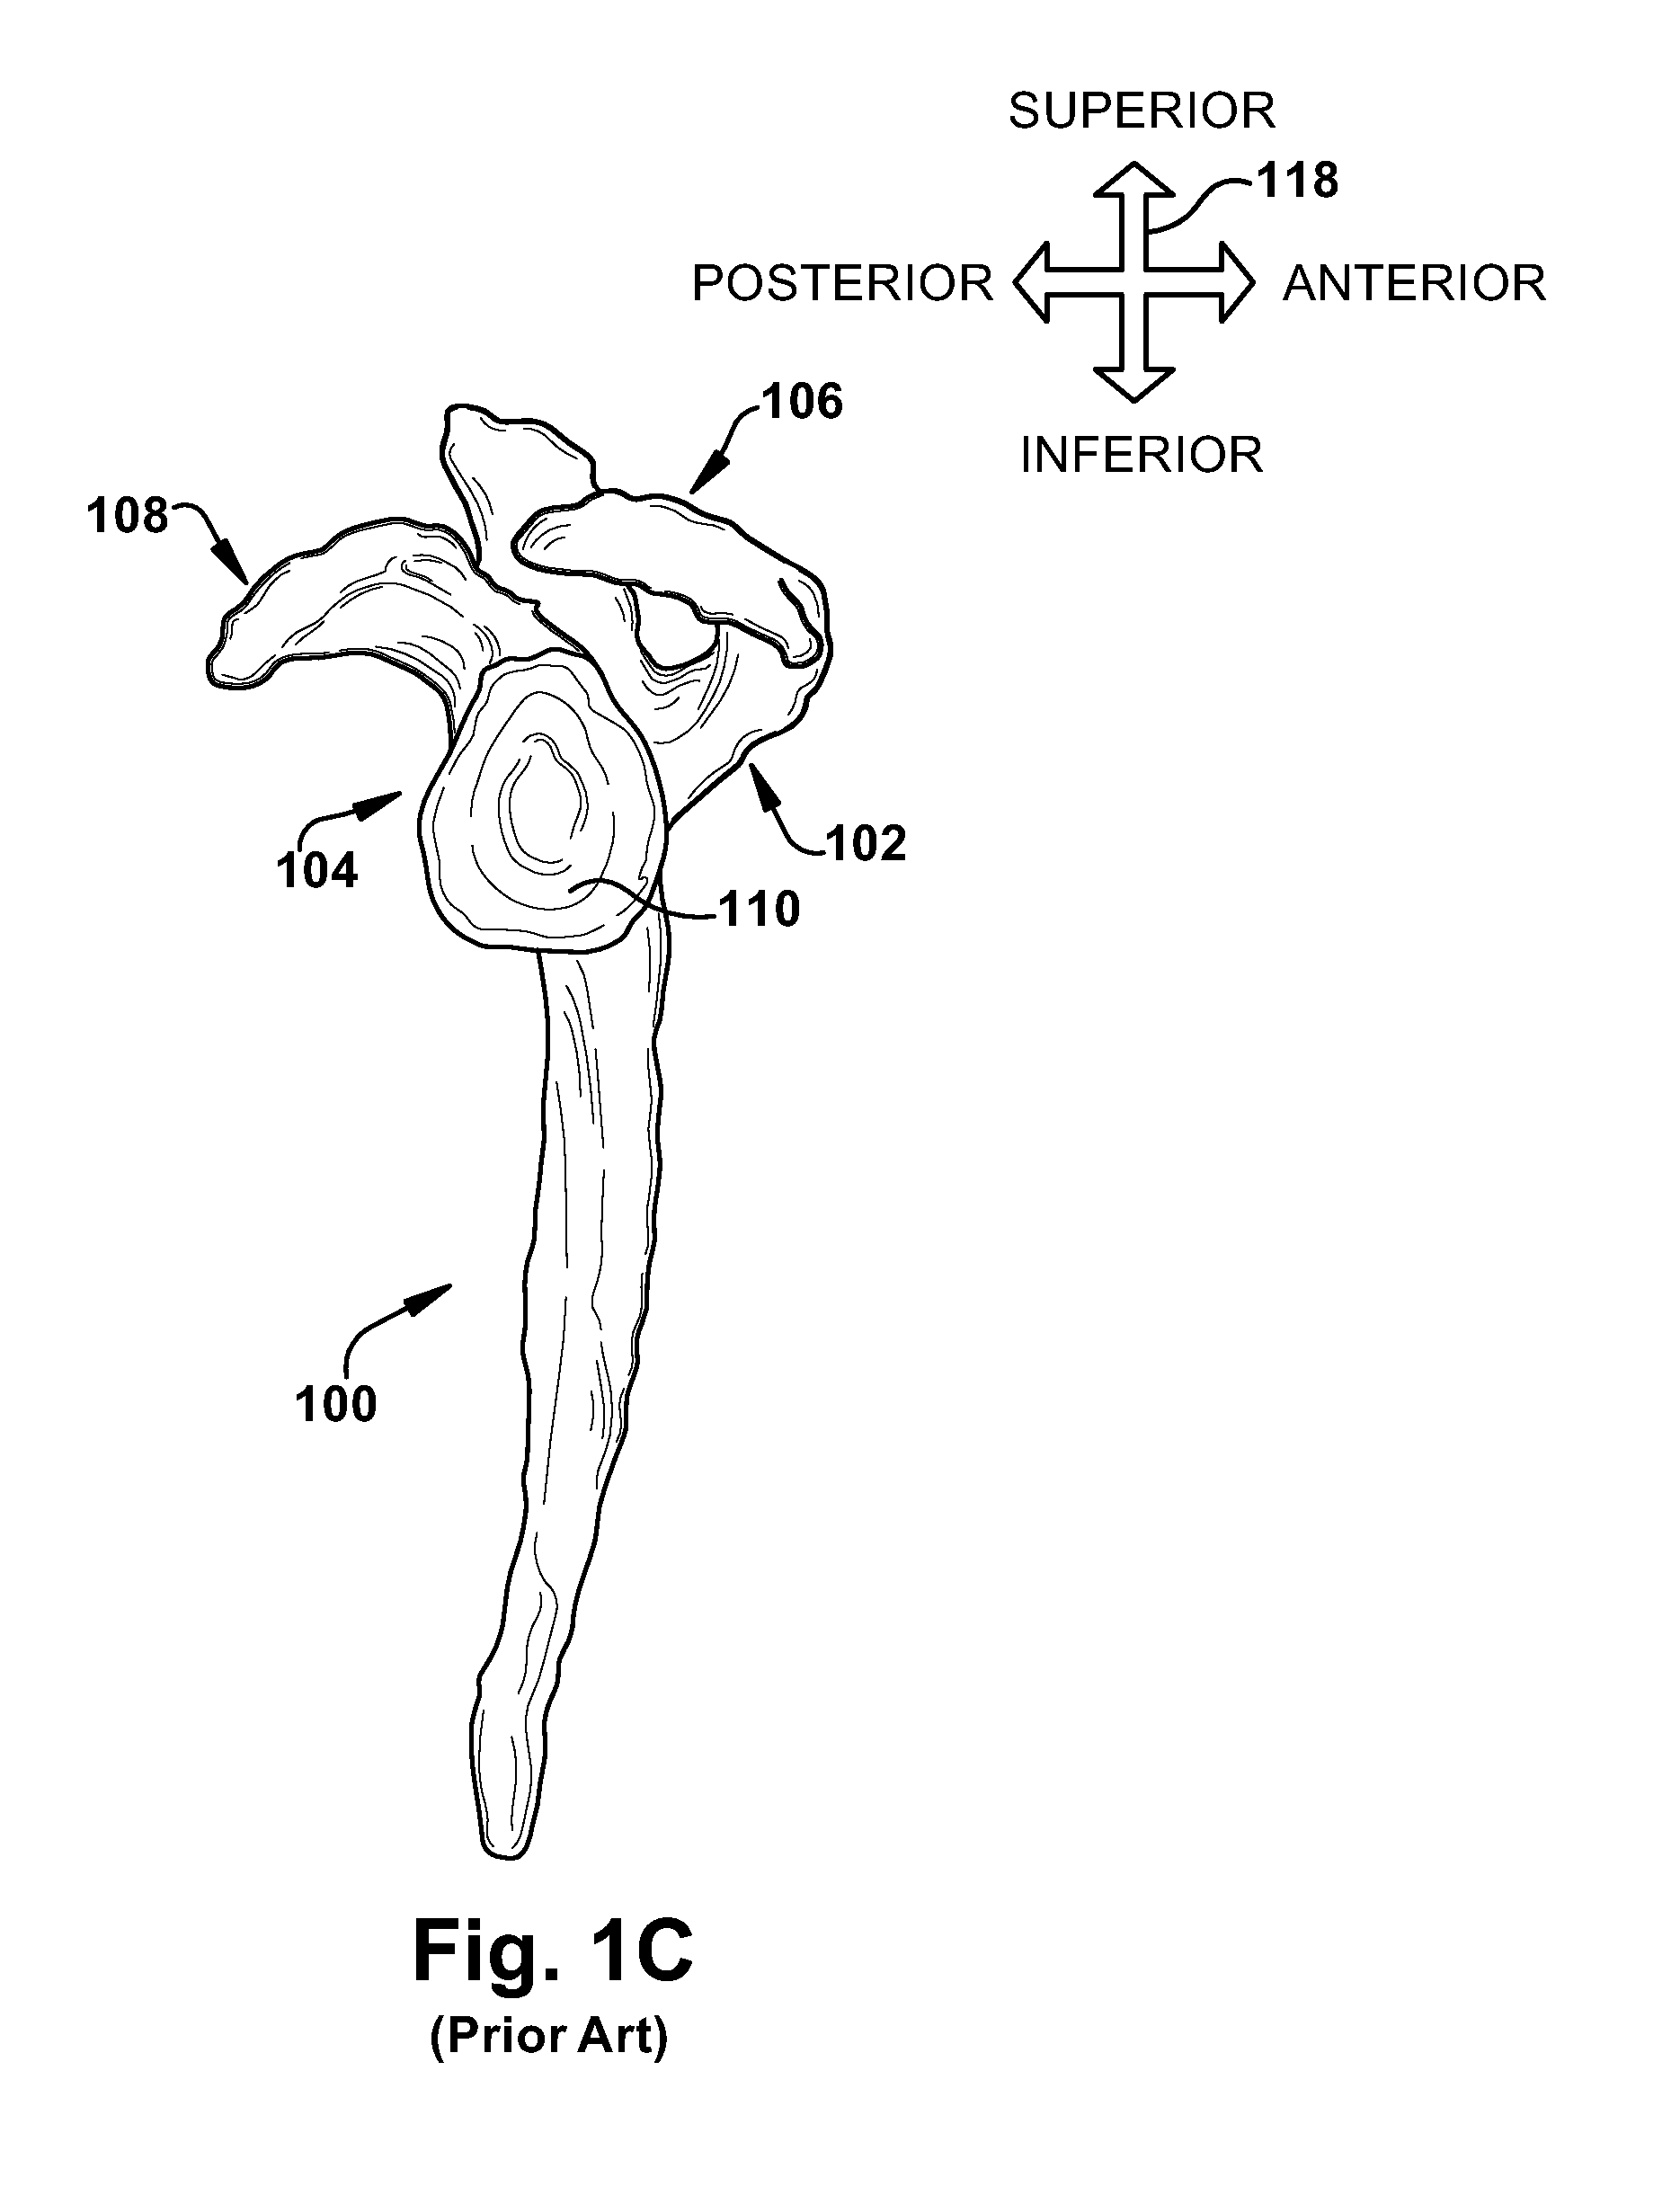 System of preoperative planning and provision of patient-specific surgical aids